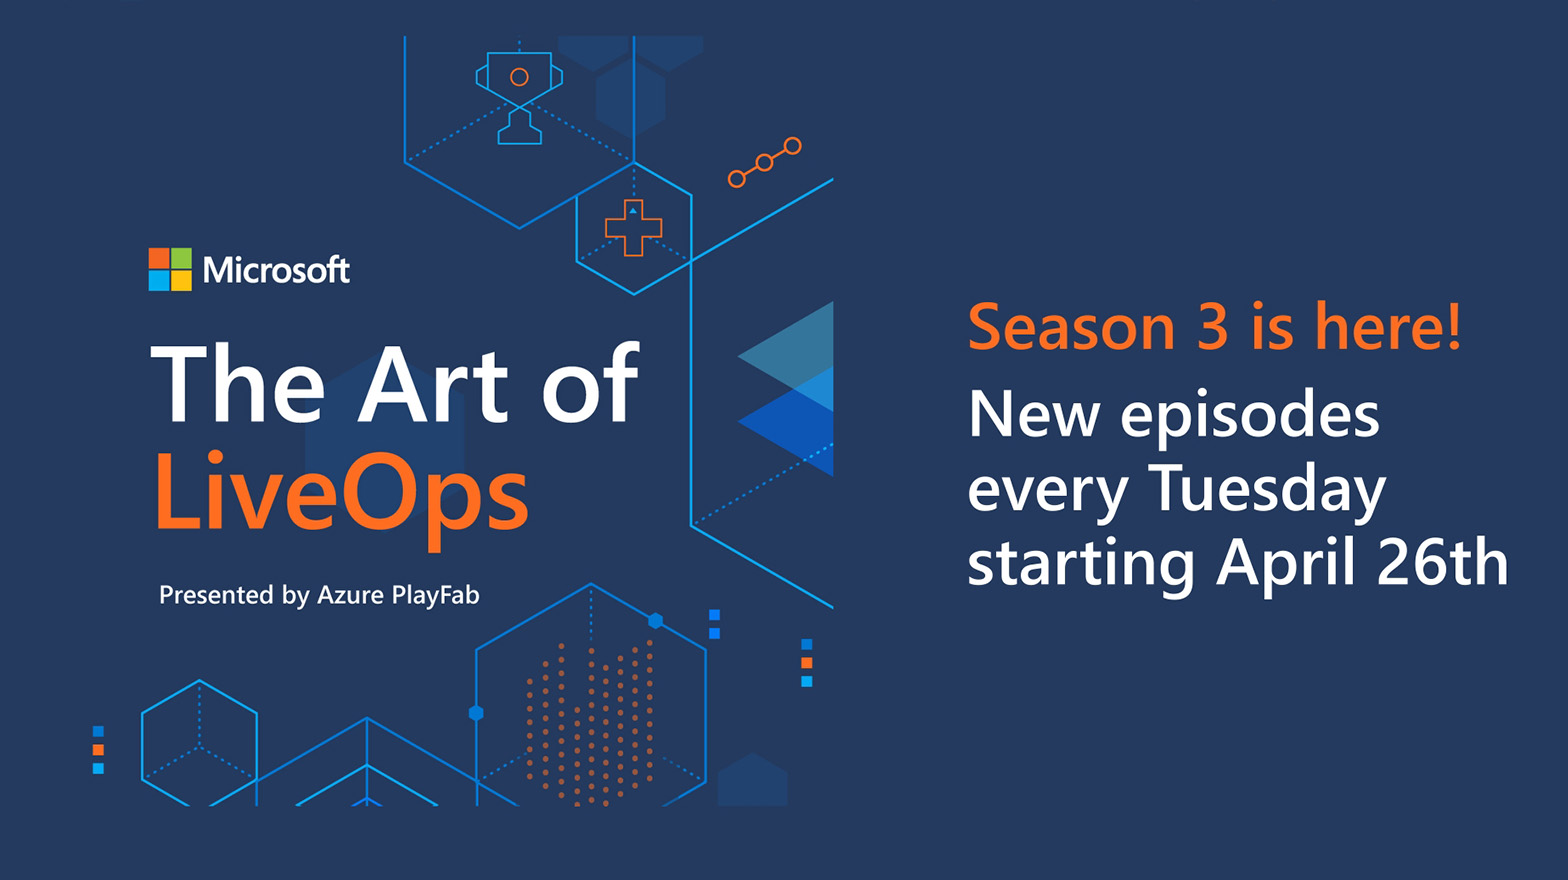 The Art of LiveOps Season 3 is here! New episodes every Tuesday starting April 26th